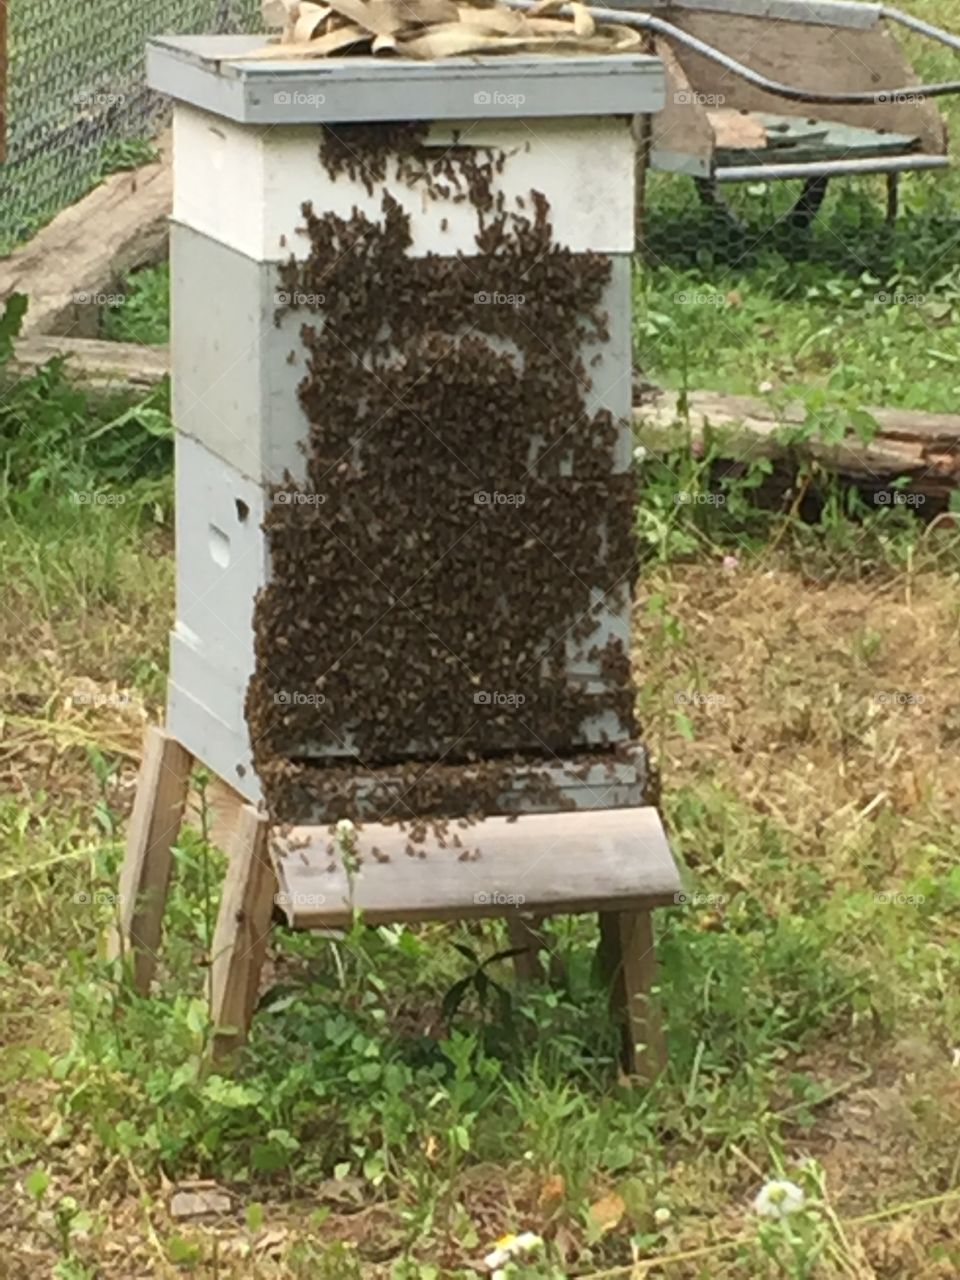 Bees keeping cool